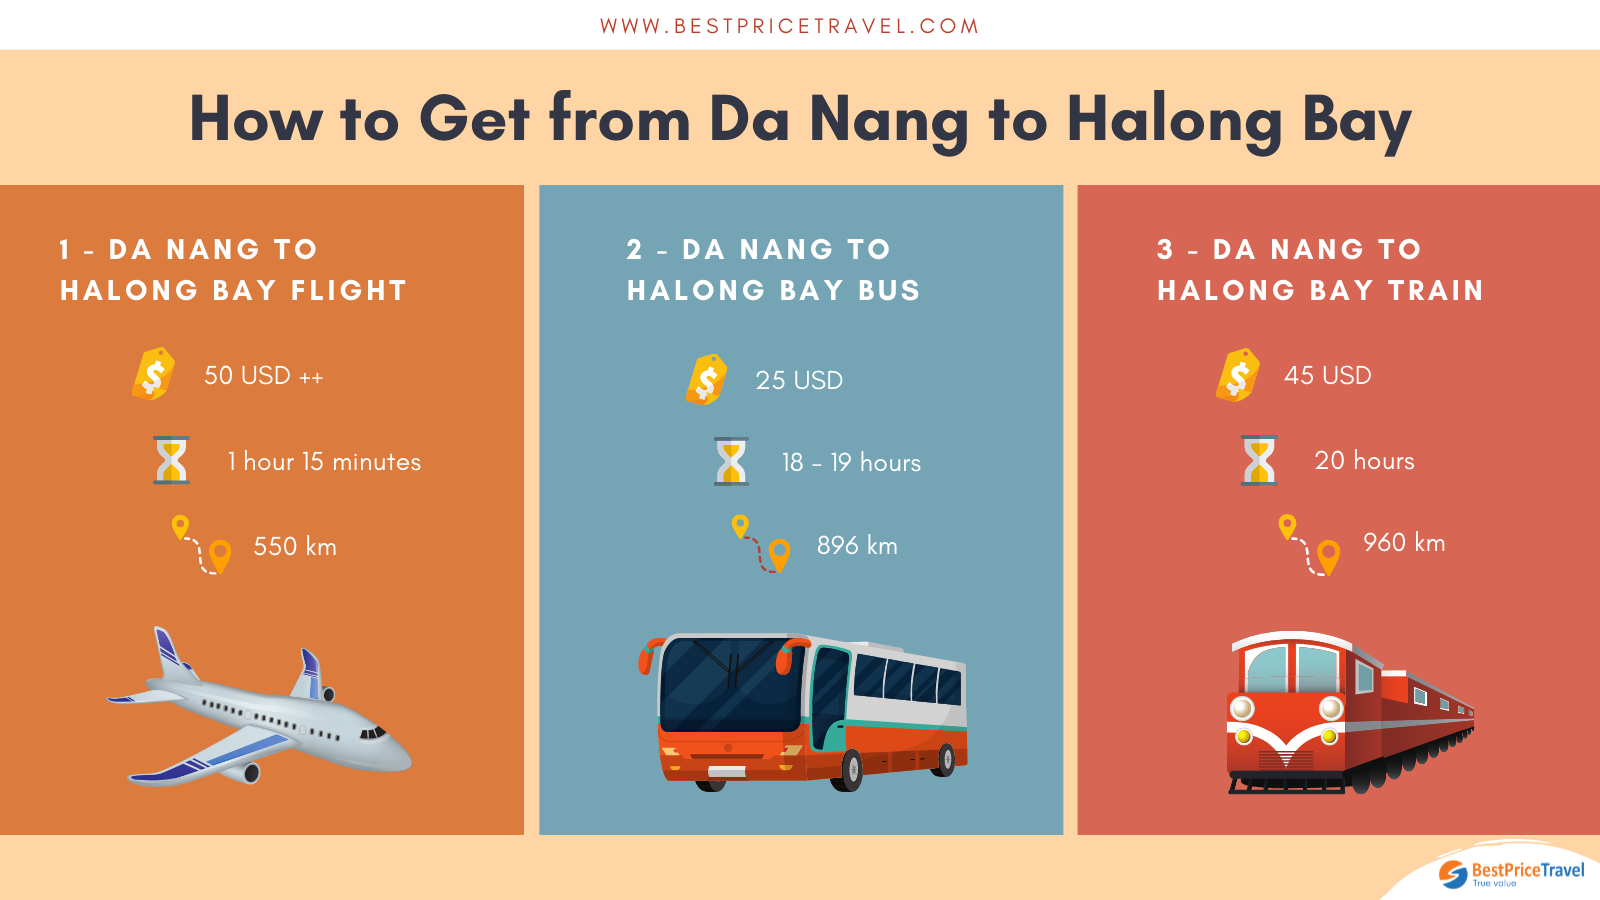 How to get from Da Nang to Halong Bay infographic